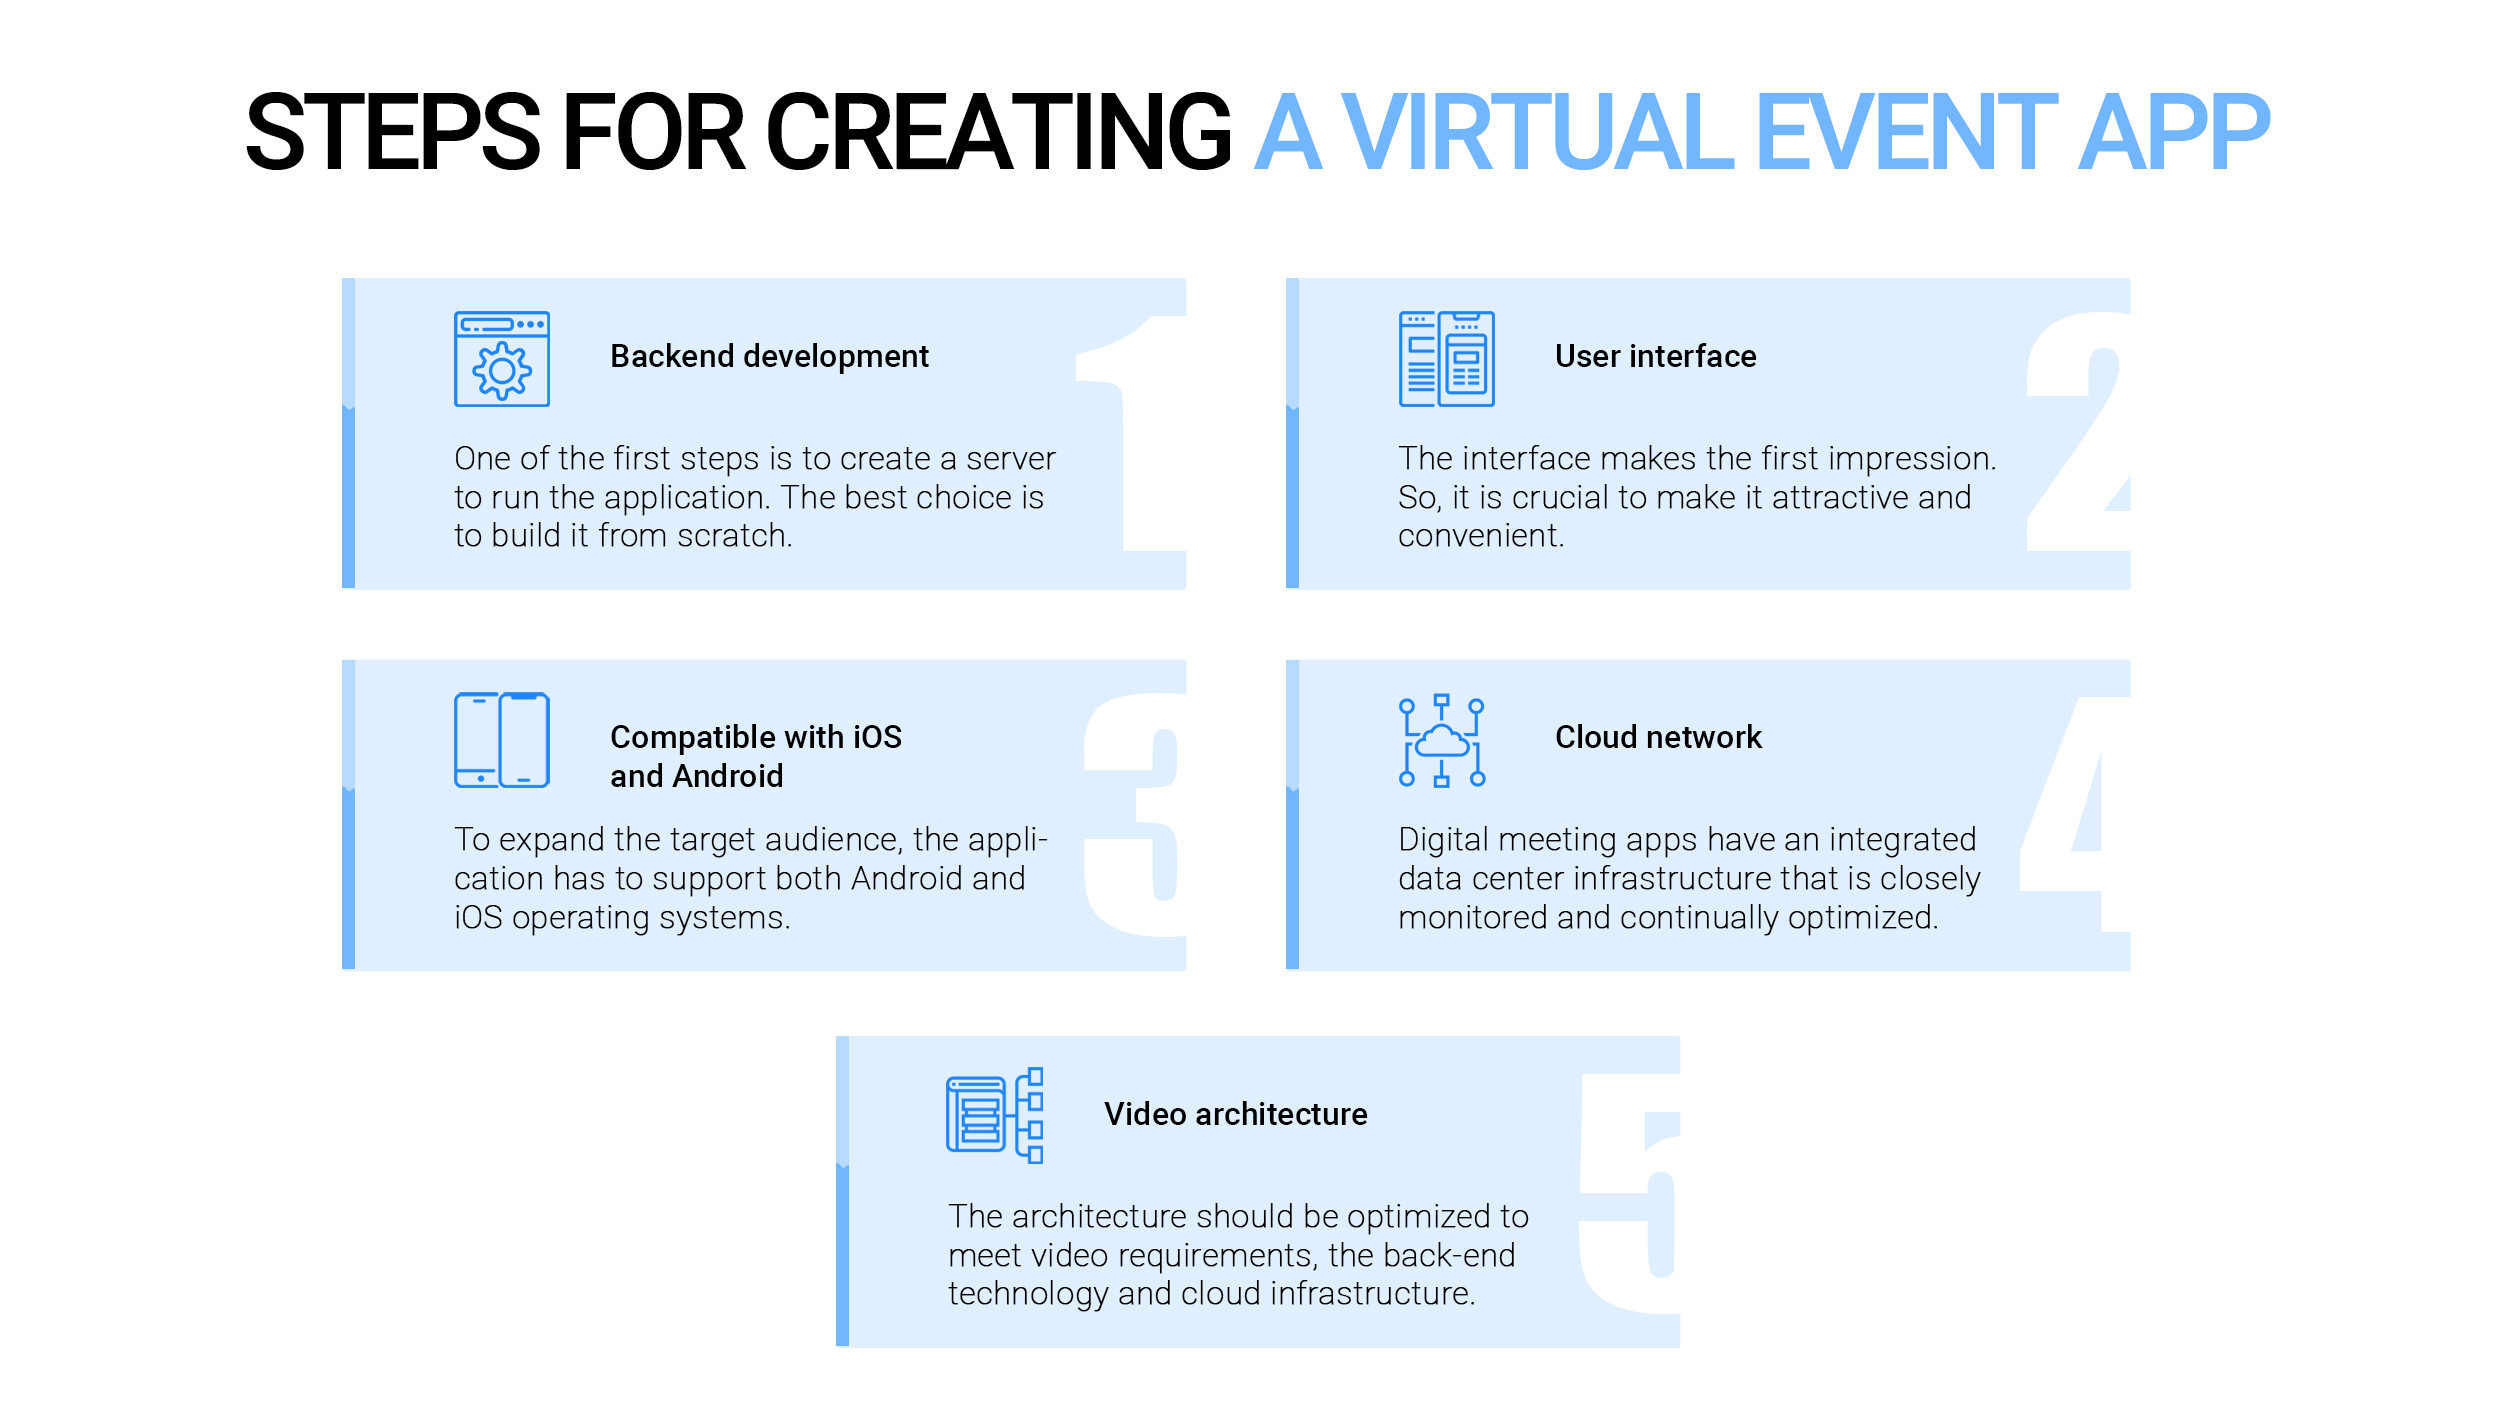 Steps for Creating a Virtual Event App